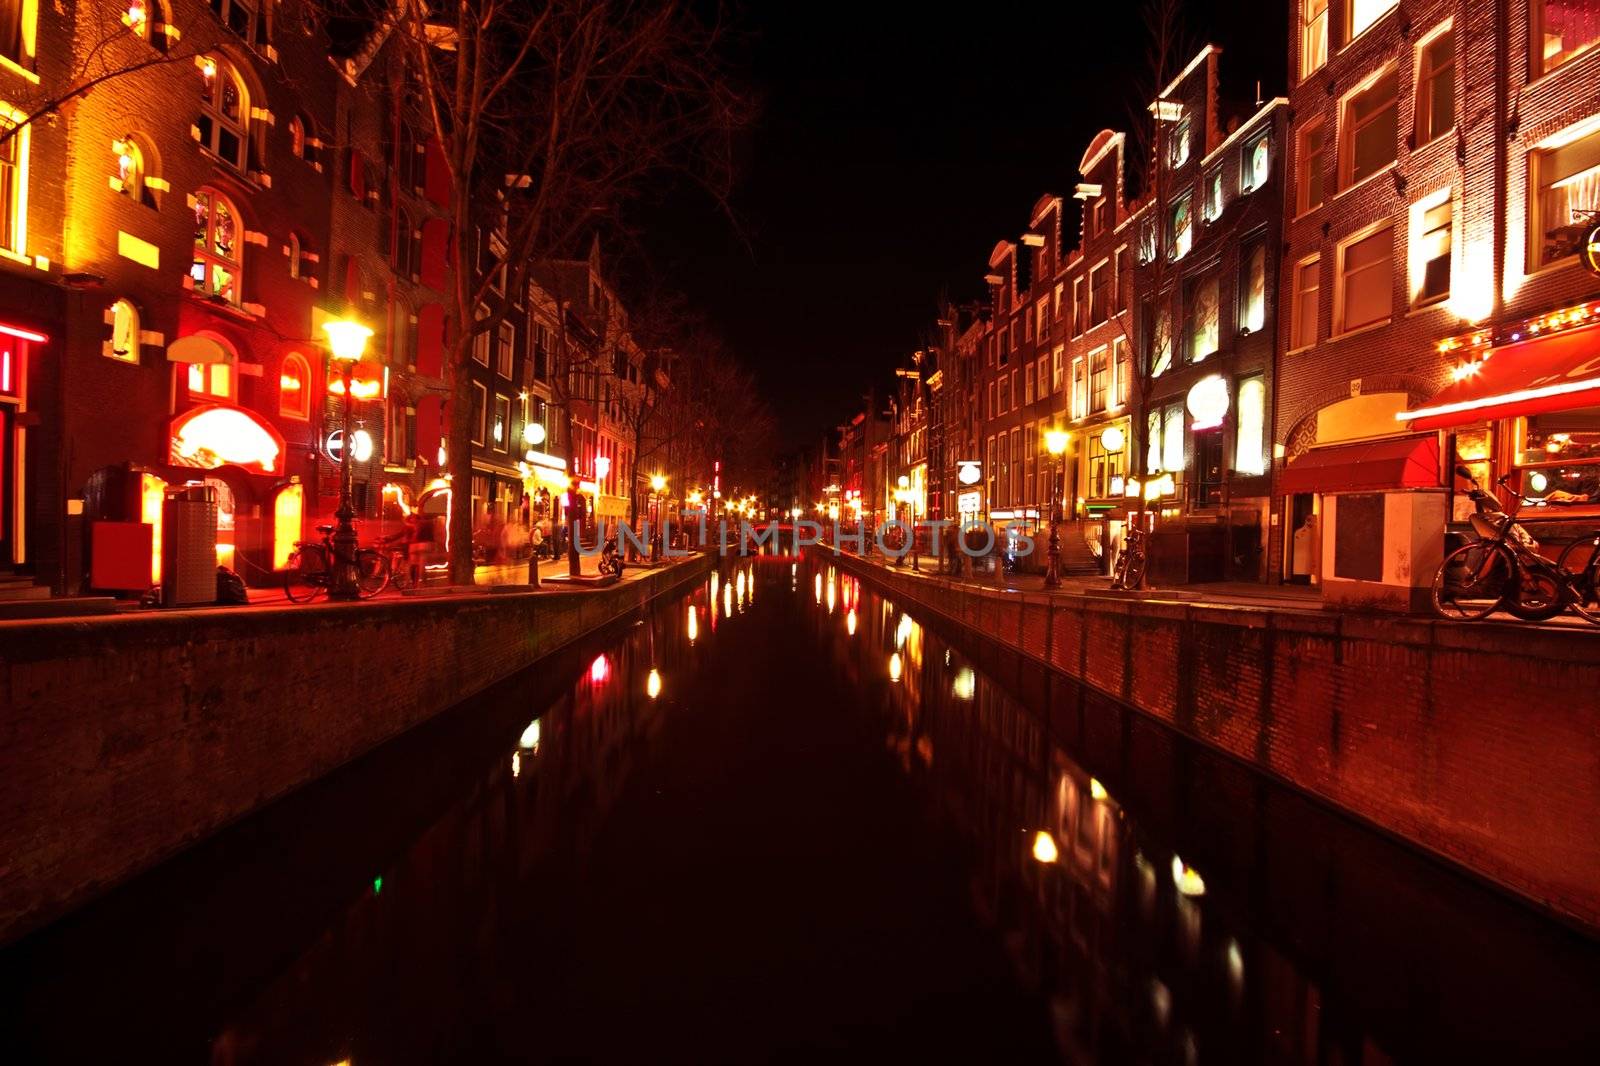 Red light district in Amsterdam the Netherlands at night by devy